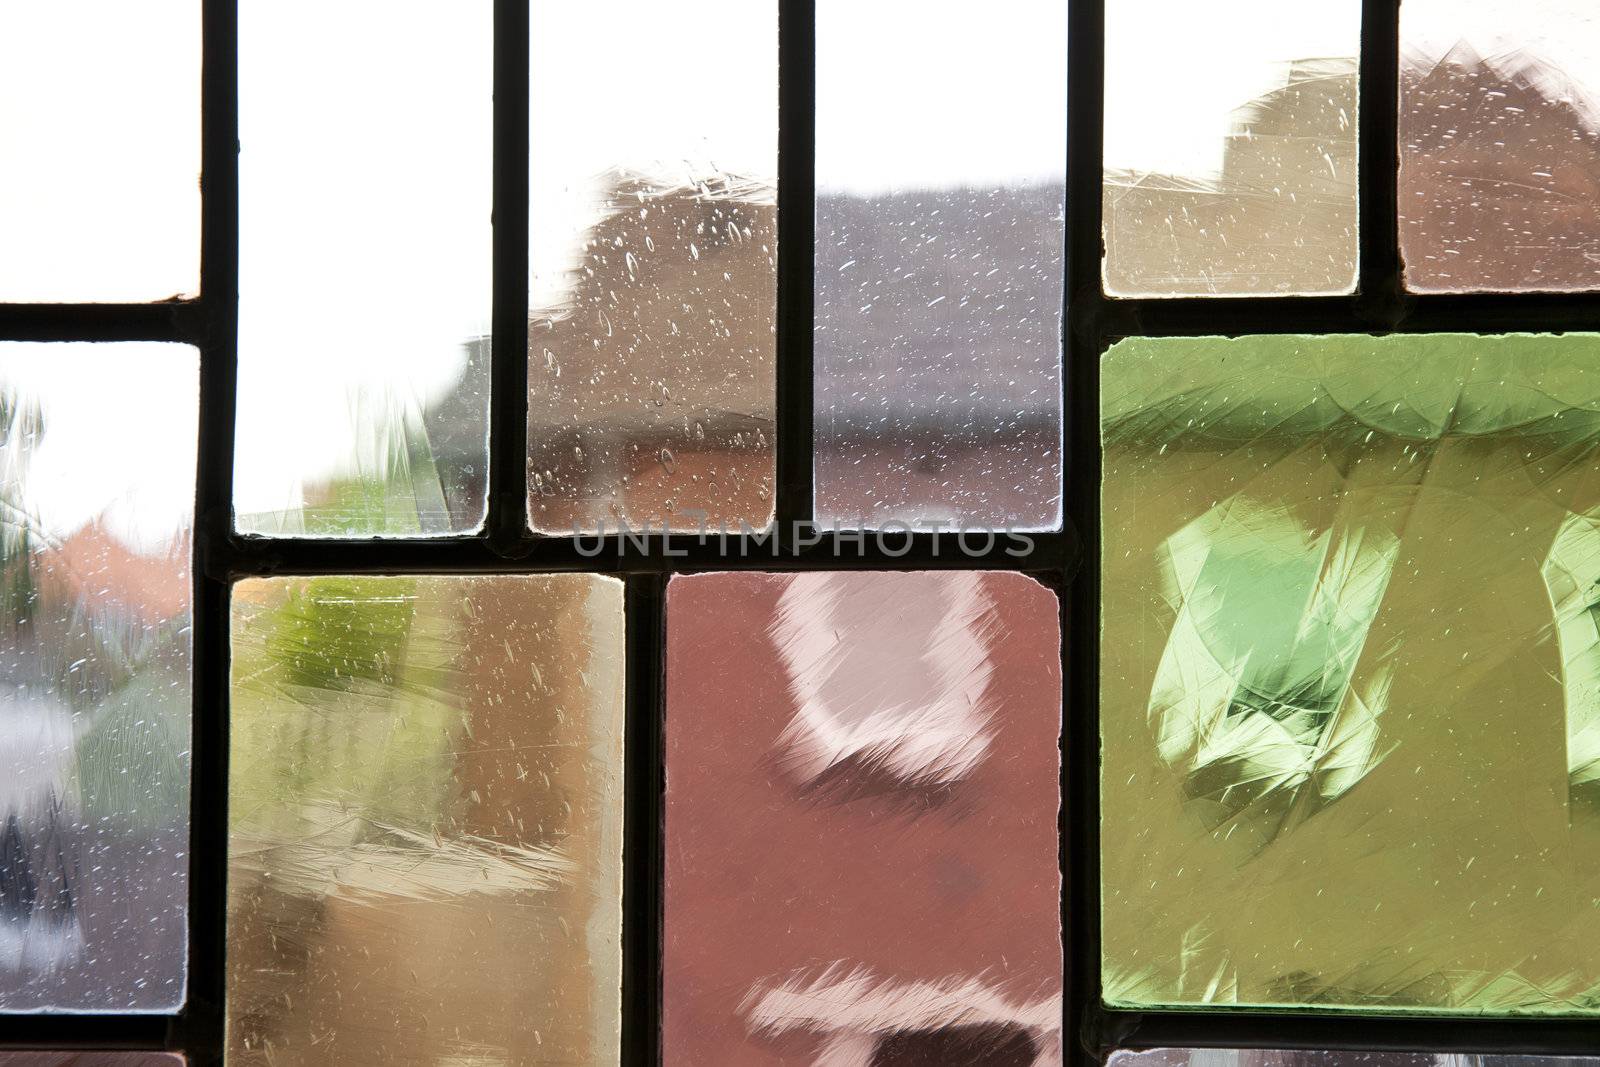 Abstract distortion of buildings through leaded glass.